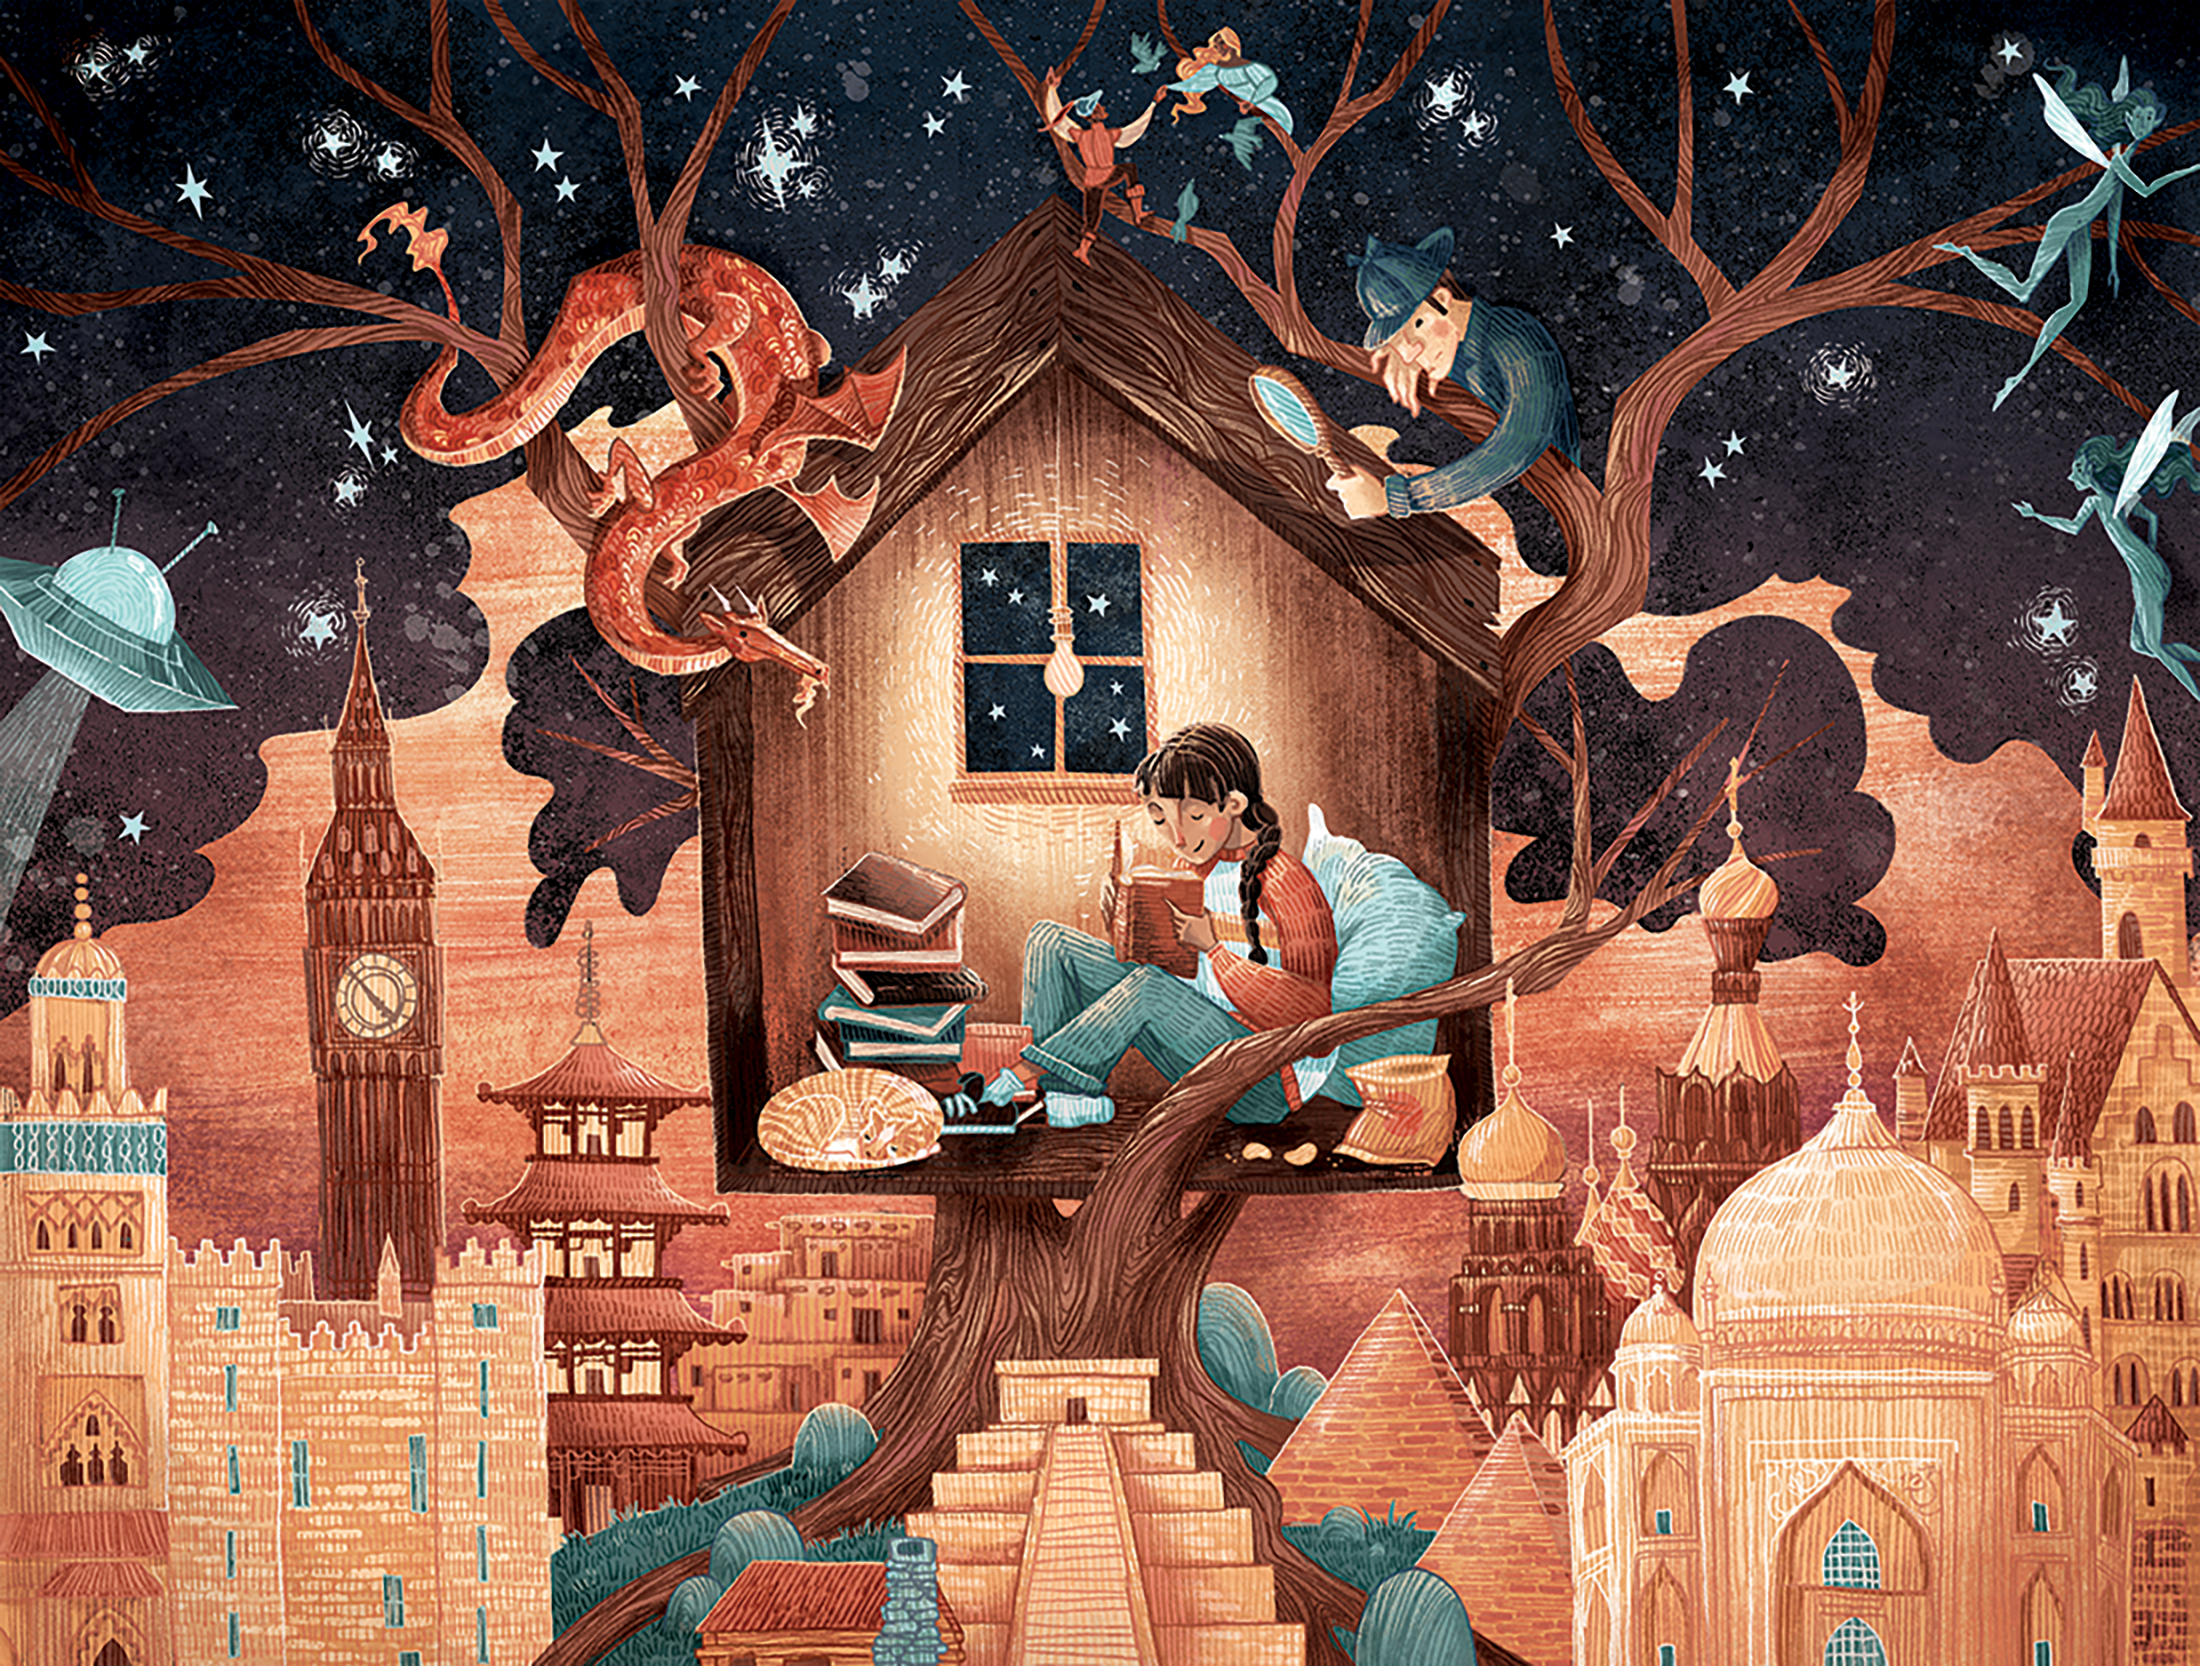  Illustration of a girl sitting in a treehouse reading books with an orange tabby cat at her feet. Above the treehouse is the night sky with a dragon, detective, knights, fairies, and aliens in the tree branches. Below the treehouse are historic landmarks around the world.